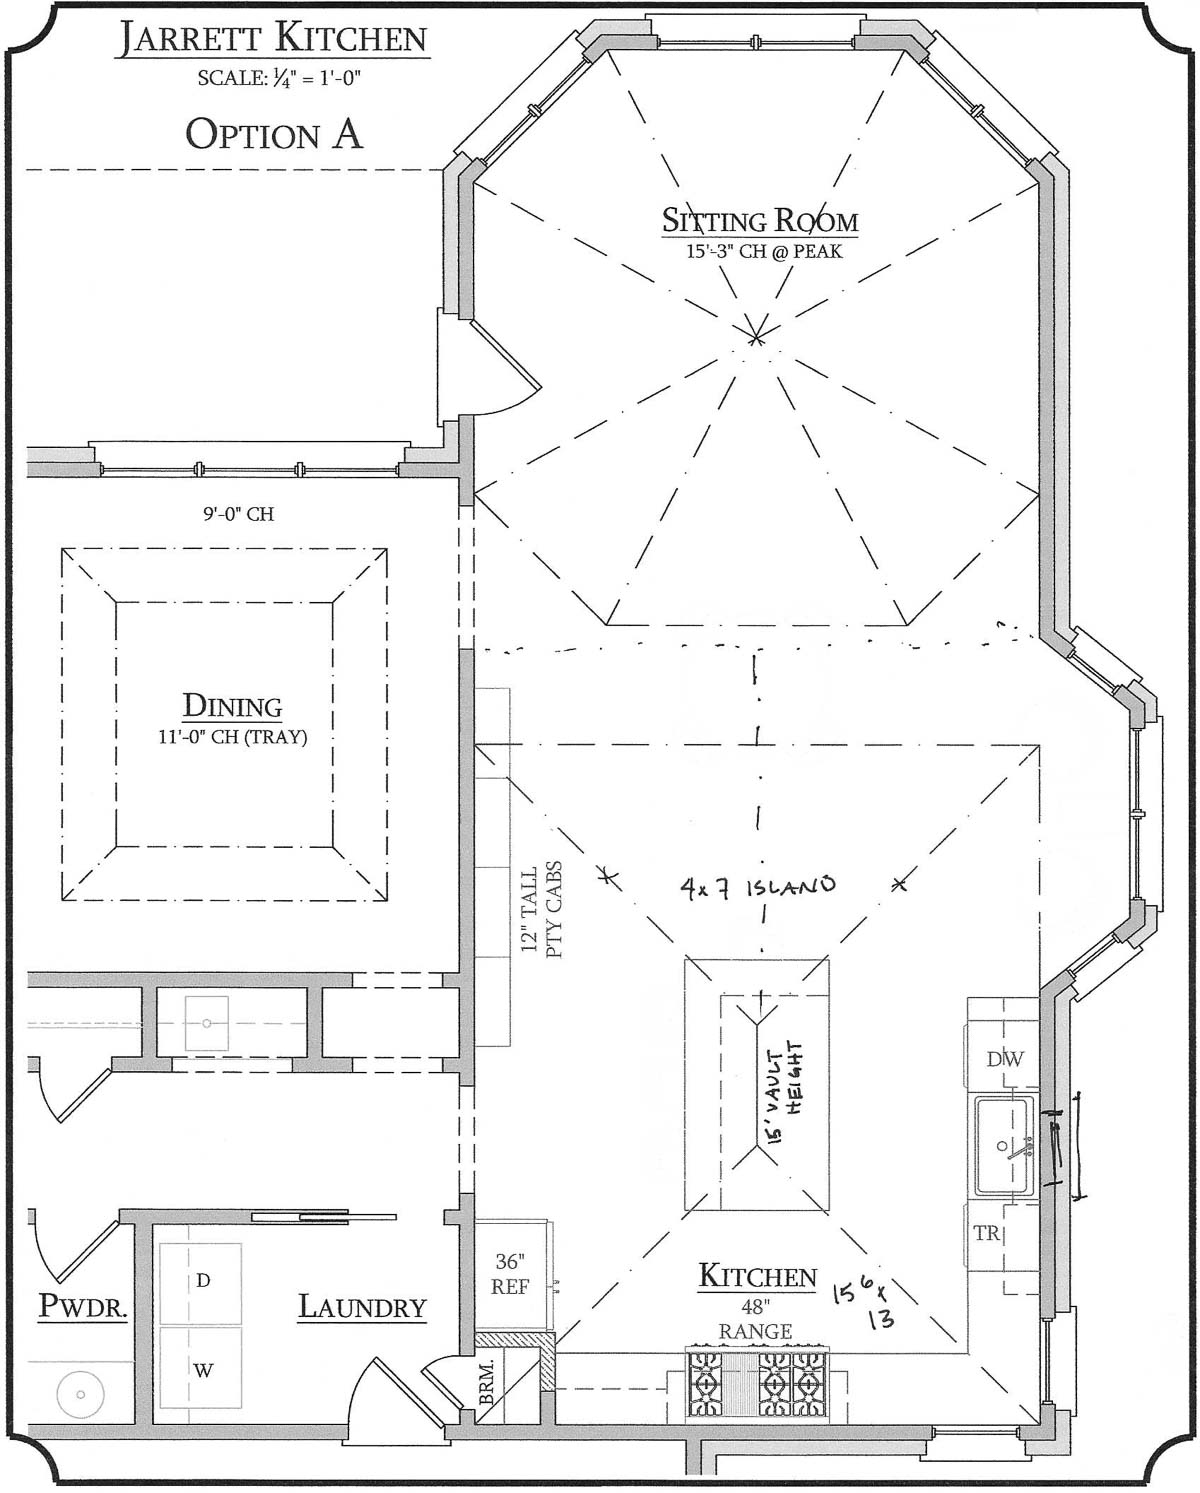 Kitchen layout option A - architectural drawing